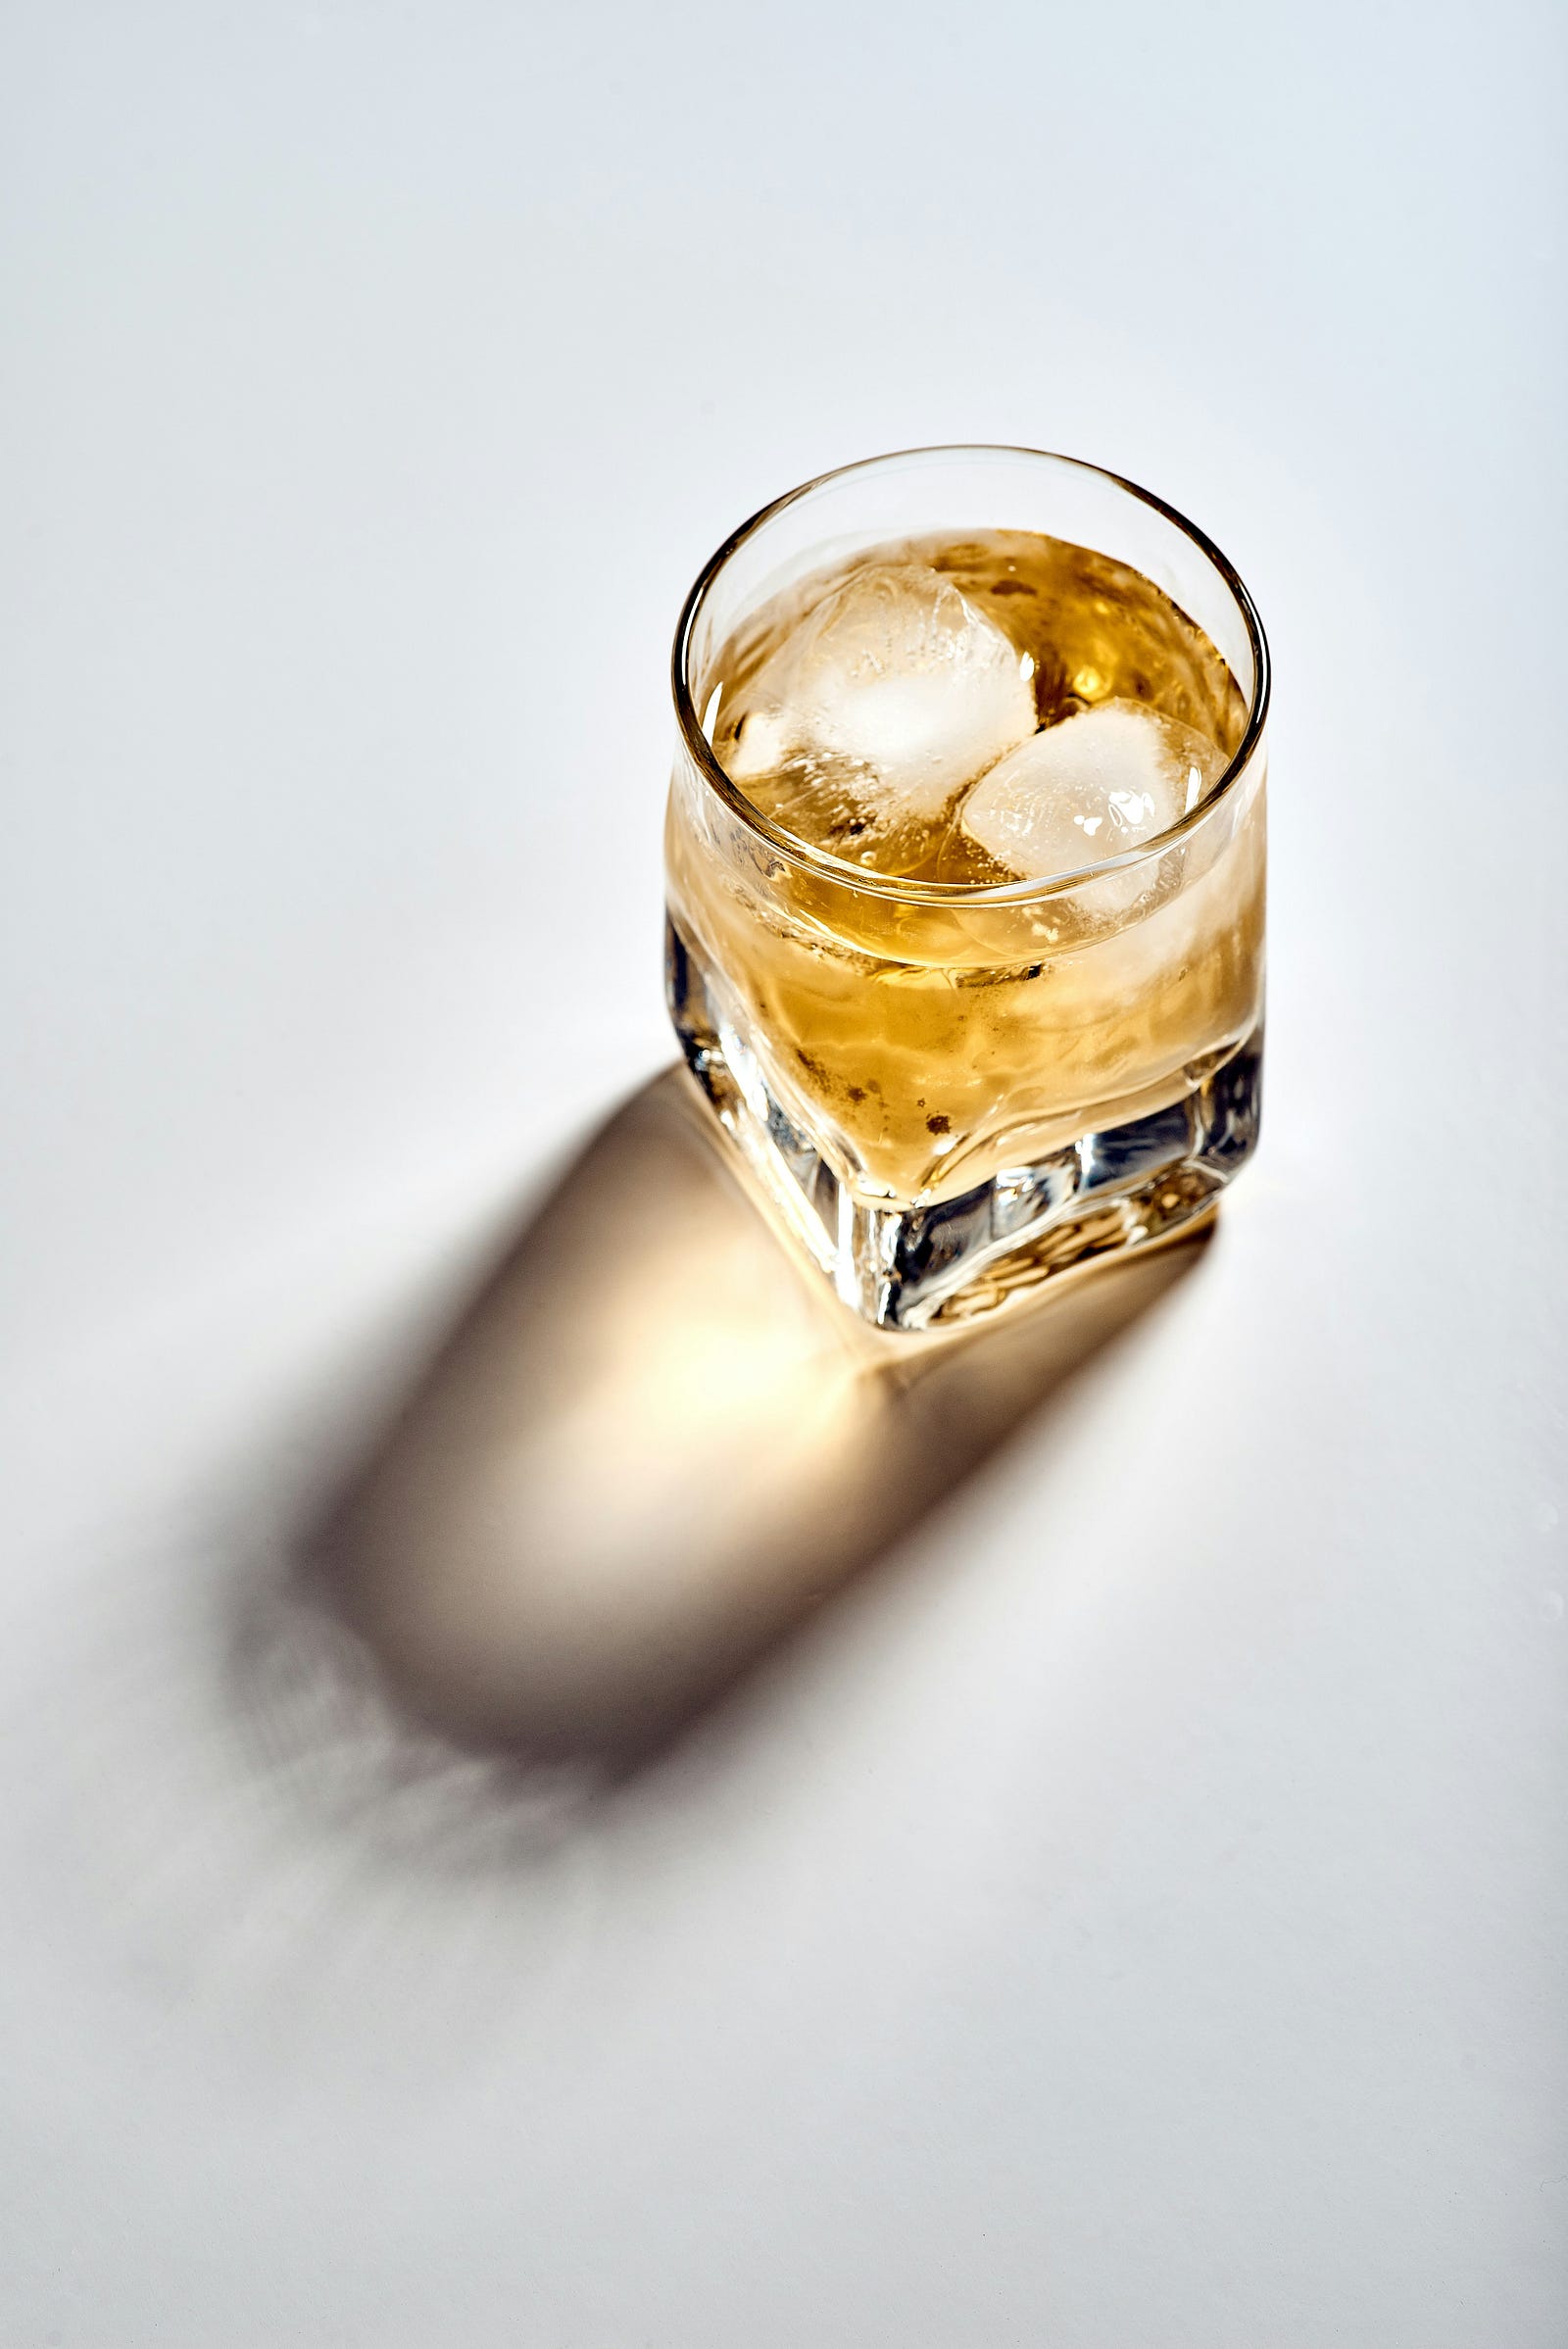 A square-bottomed clear glass of amber-colored alcohol. Alcohol raises colon cancer risk.